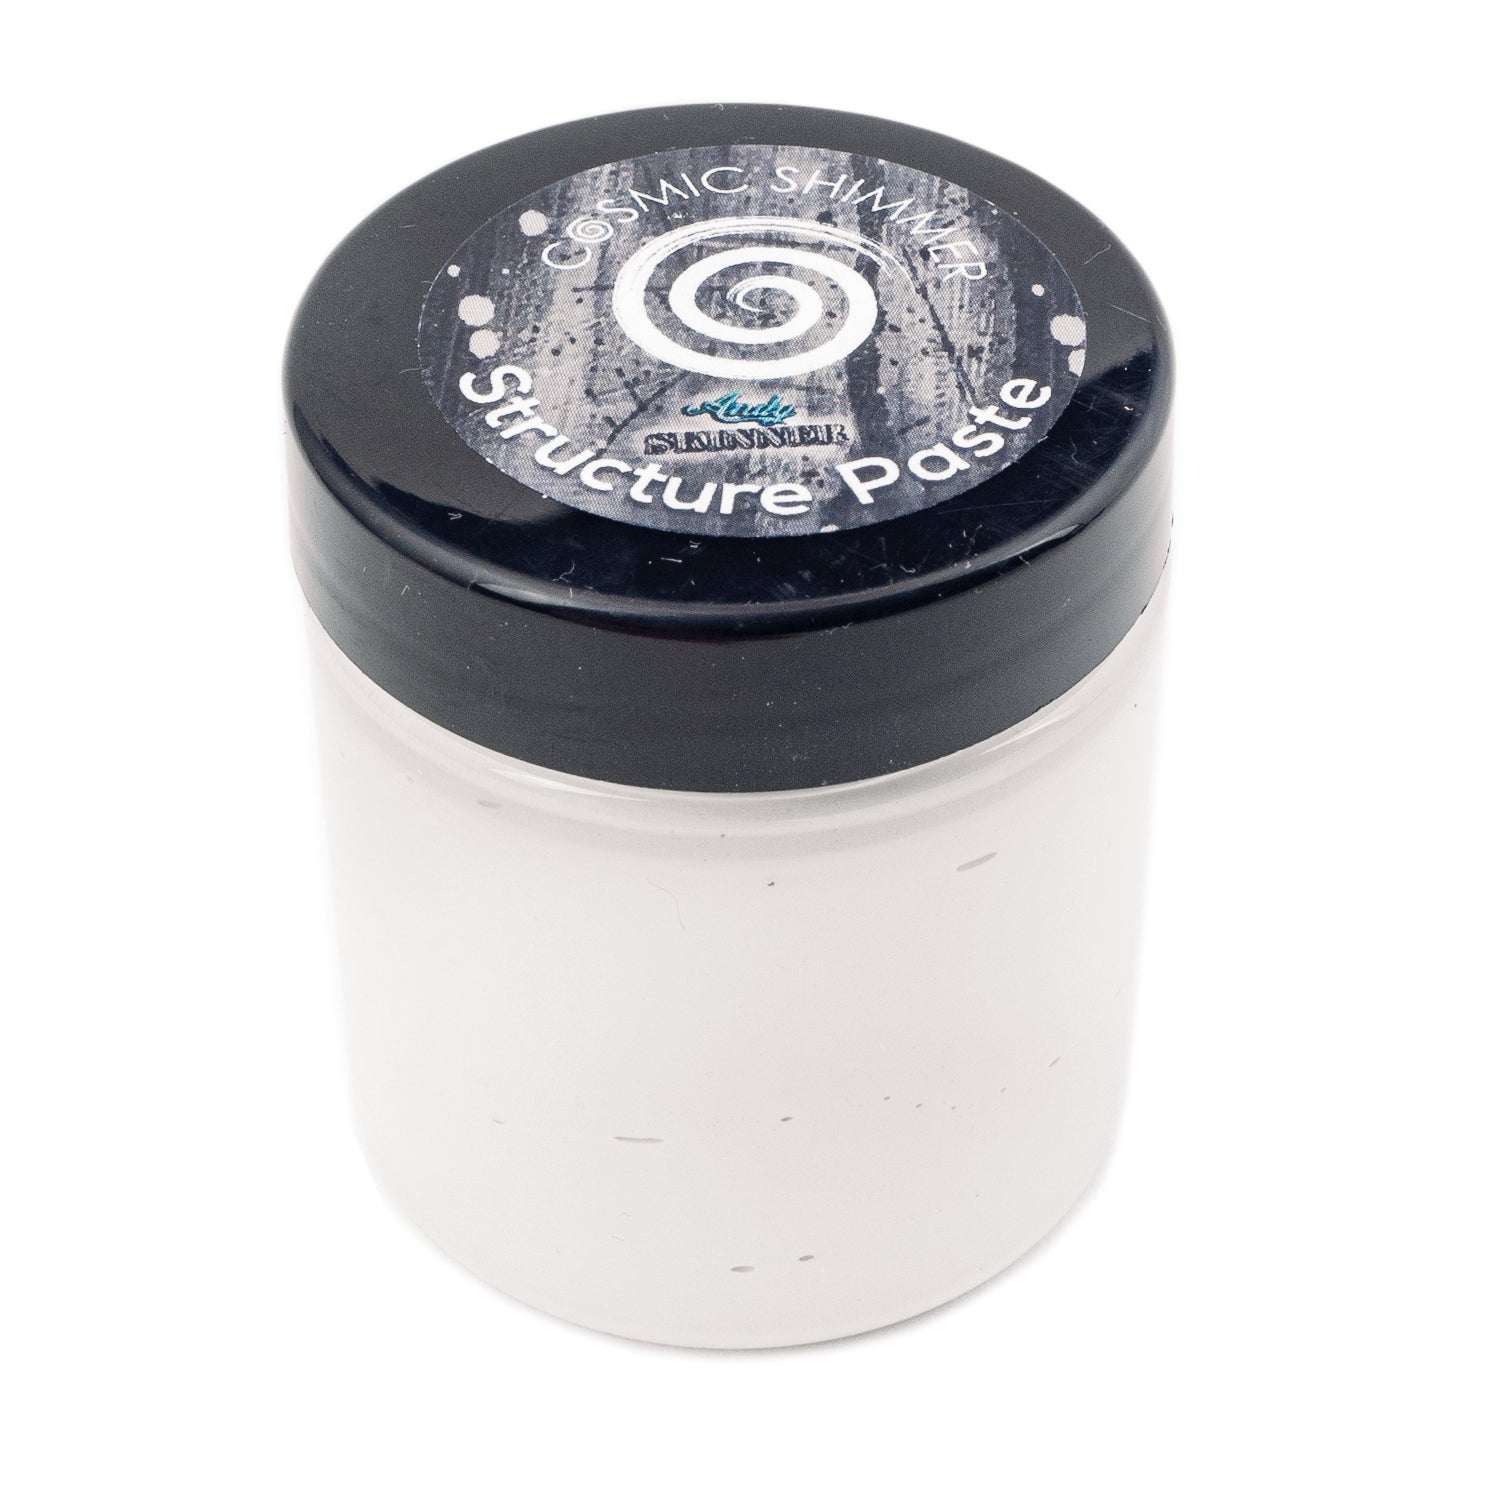 Cosmic Shimmer Andy Skinner Structure Paste 75 ml